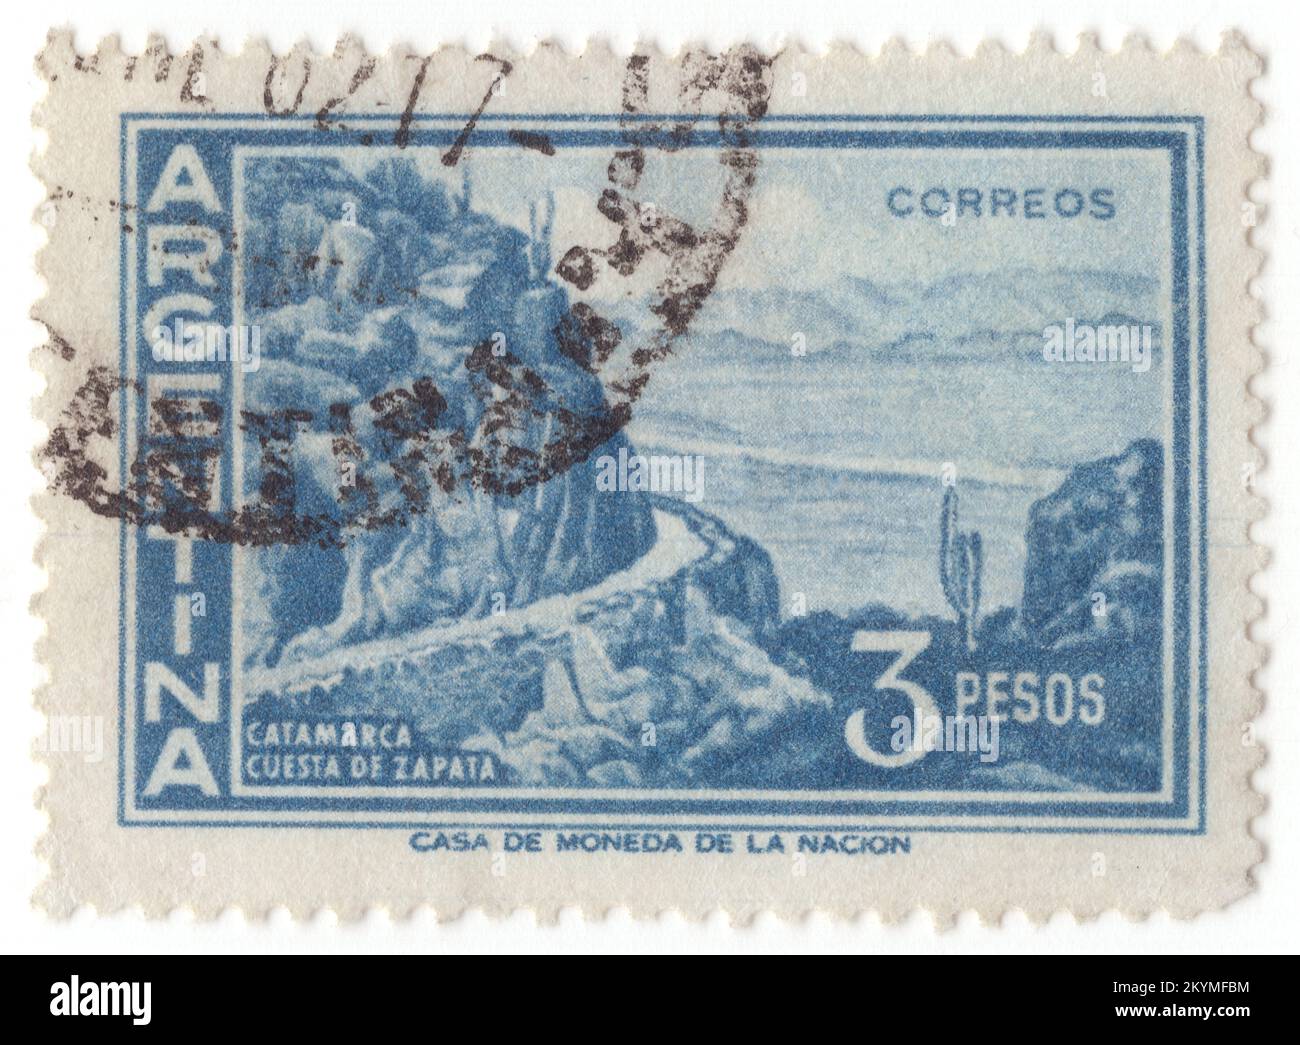 ARGENTINA - 1960: 3 pesos dark blue postage stamp depicting Zapata Slope, Catamarca. Catamarca is a province of Argentina, located in the northwest of the country. Its literacy rate is 95,5%. Neighbouring provinces are (clockwise, from the north): Salta, Tucuman, Santiago del Estero, Cardoba, and La Rioja. To the west it borders the country of Chile. The capital is San Fernando del Valle de Catamarca, usually shortened to Catamarca. Other important cities include Andalgalá, Tinogasta, and Belen. Most of Catamarca's territory is covered by mountains (80%) Stock Photo